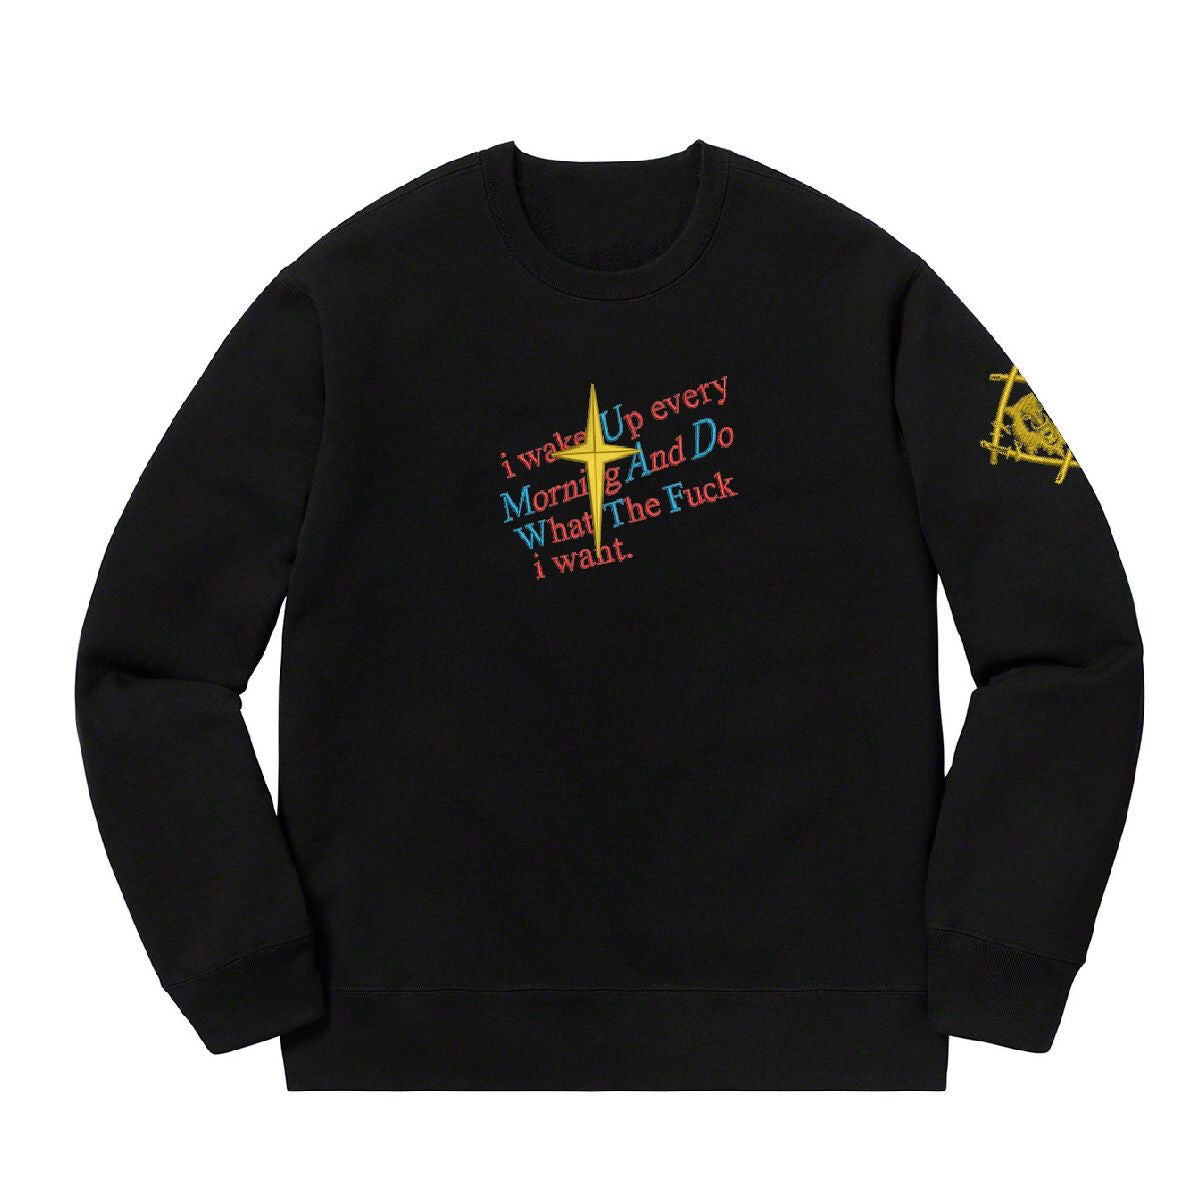 IKON X HS WAKE UP Crewneck Sweater With Side Arm Patch